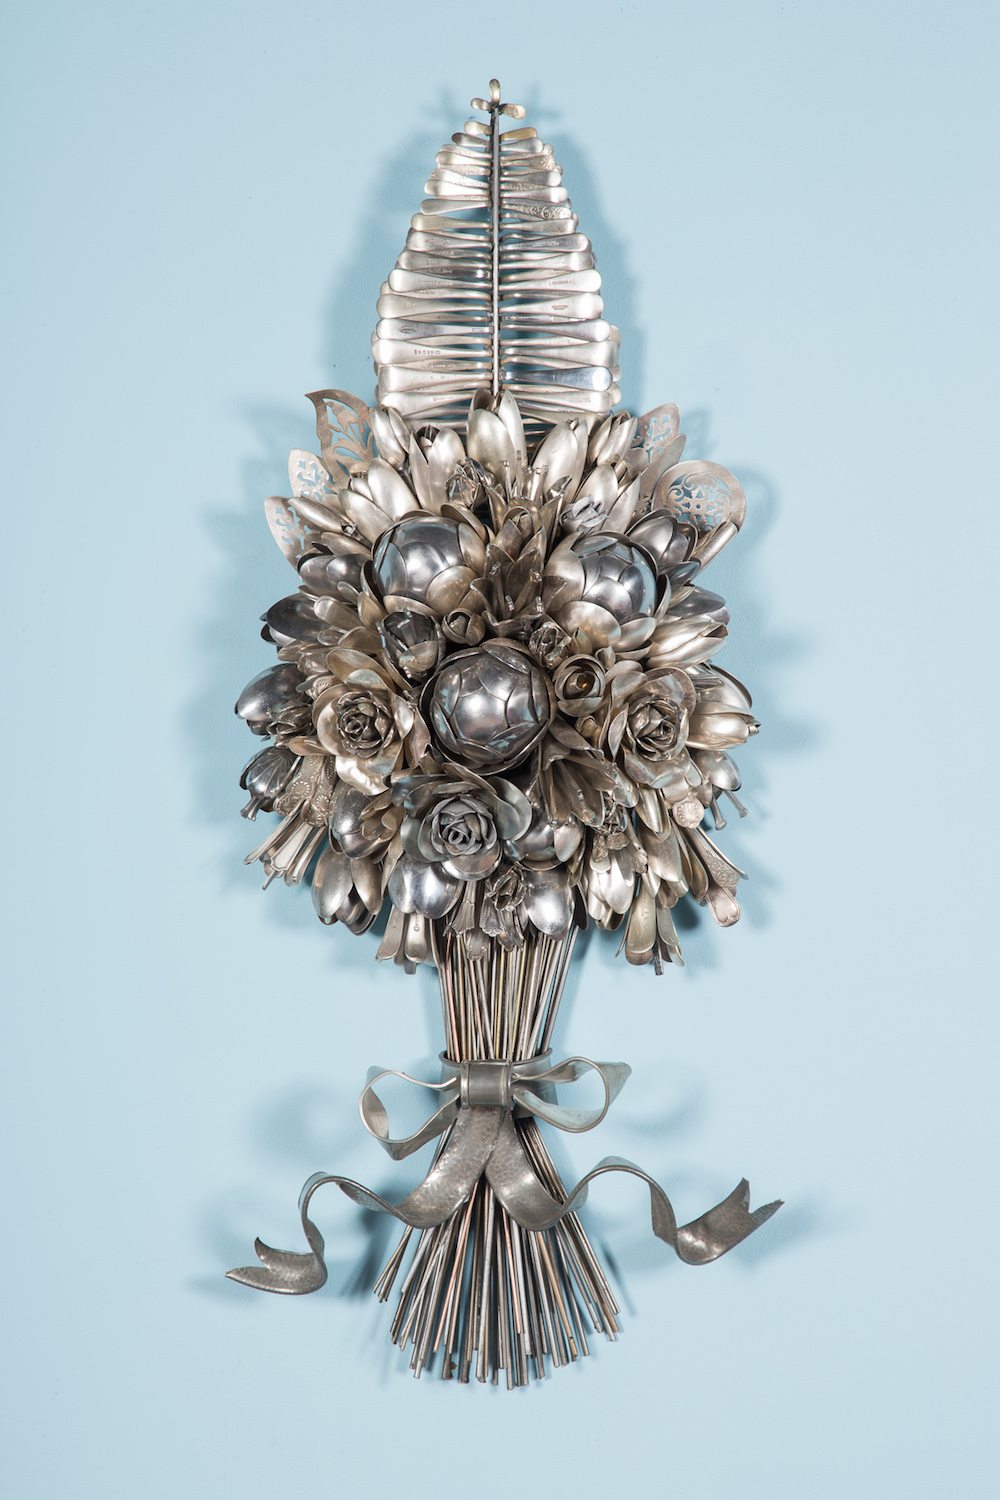 Amazingly Intricate Metal Bouquets Made Of Spare Utensils By Ann Carrington 10